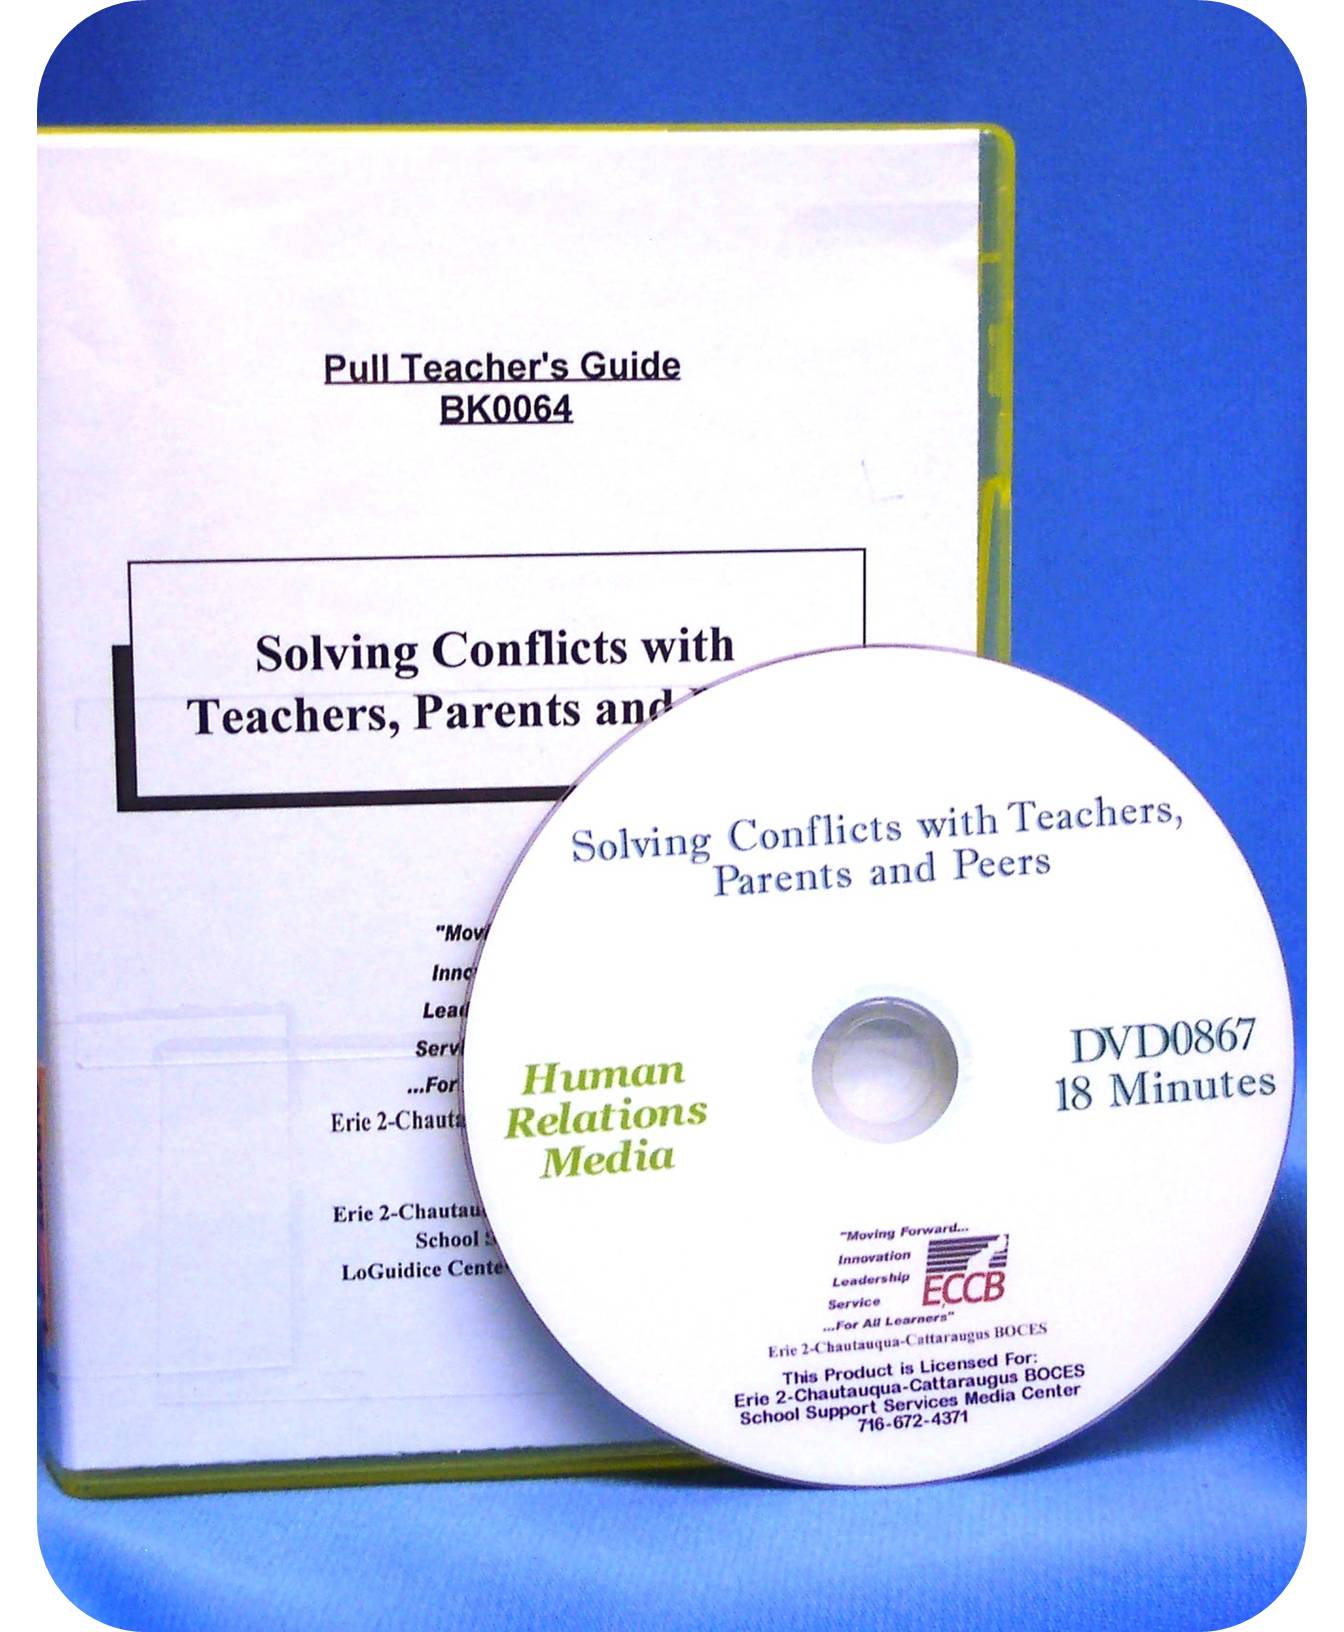 Solving Conflicts with Teachers, Parents and Peers